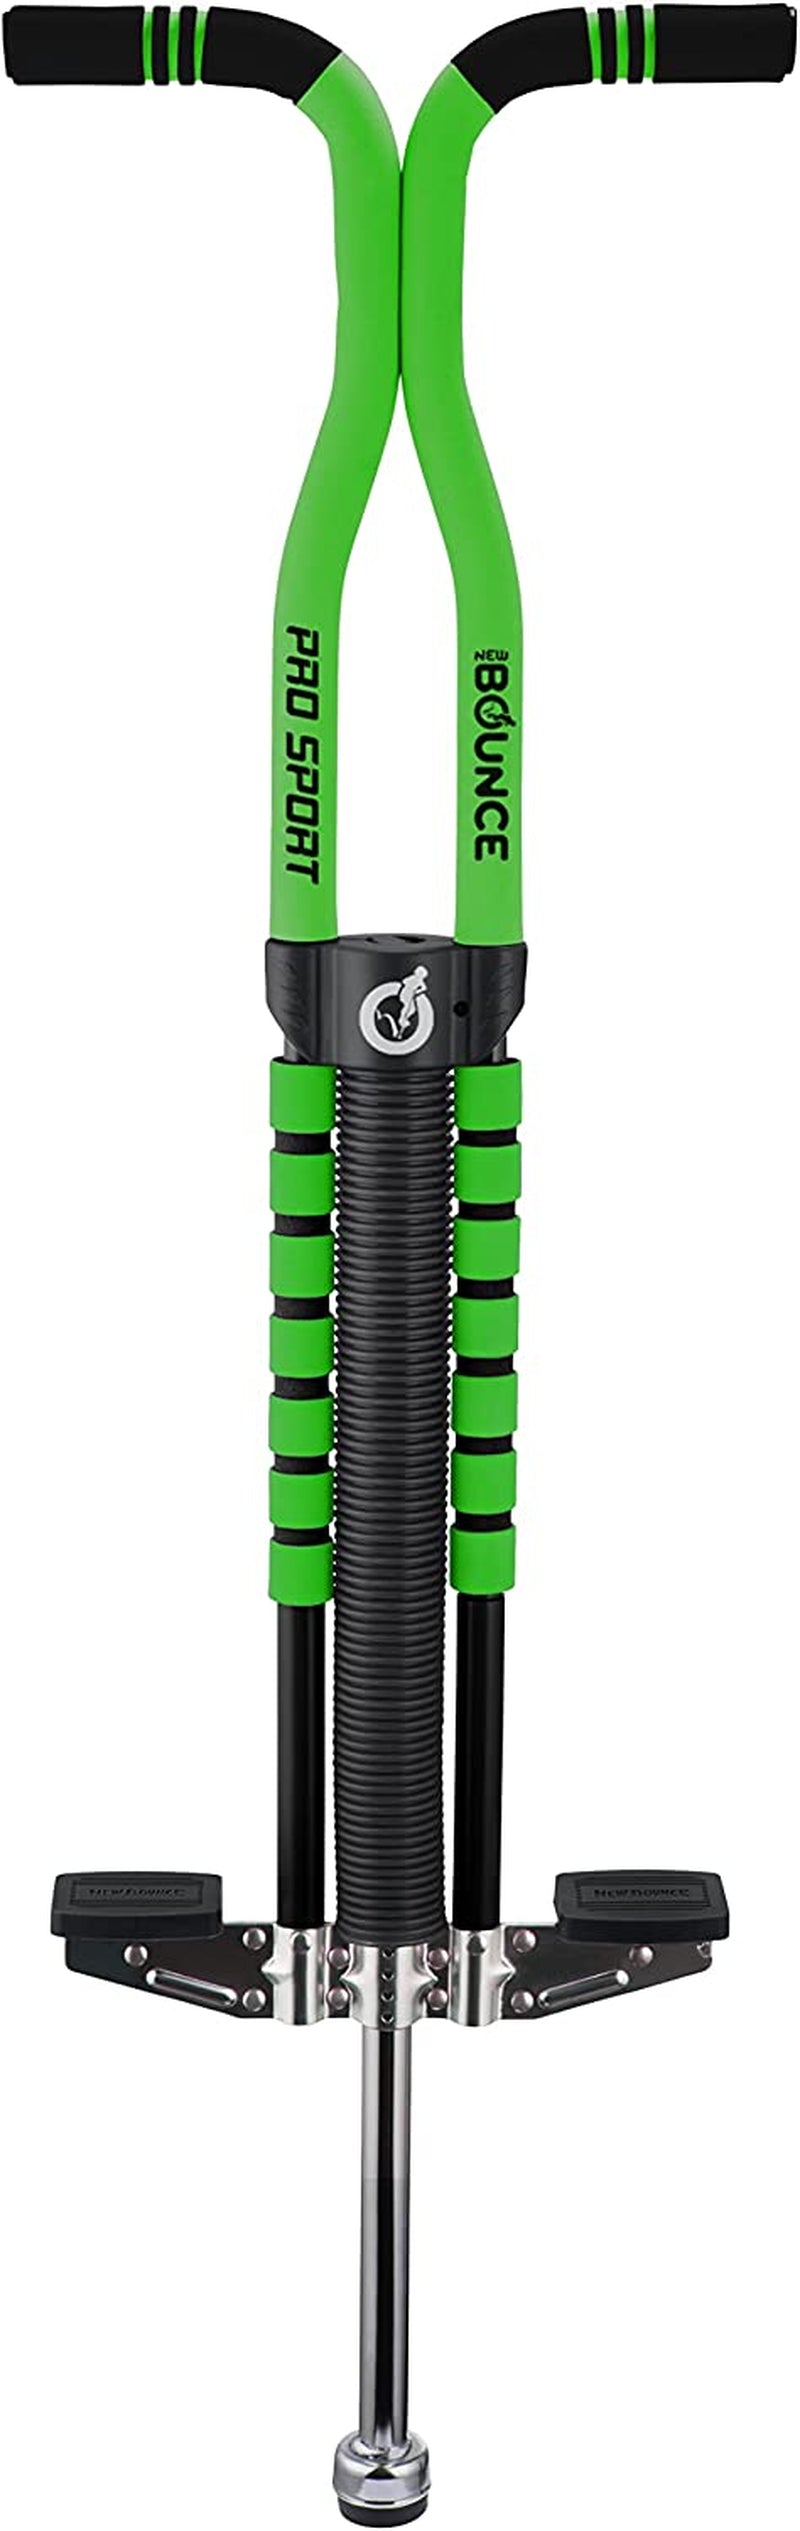 "Pro Sport Edition Pogo Stick - Premium Quality, Easy Grip Design - Suitable for Ages 9 and Up, 80 to 160 Lbs - Ensures Hours of Wholesome Entertainment"